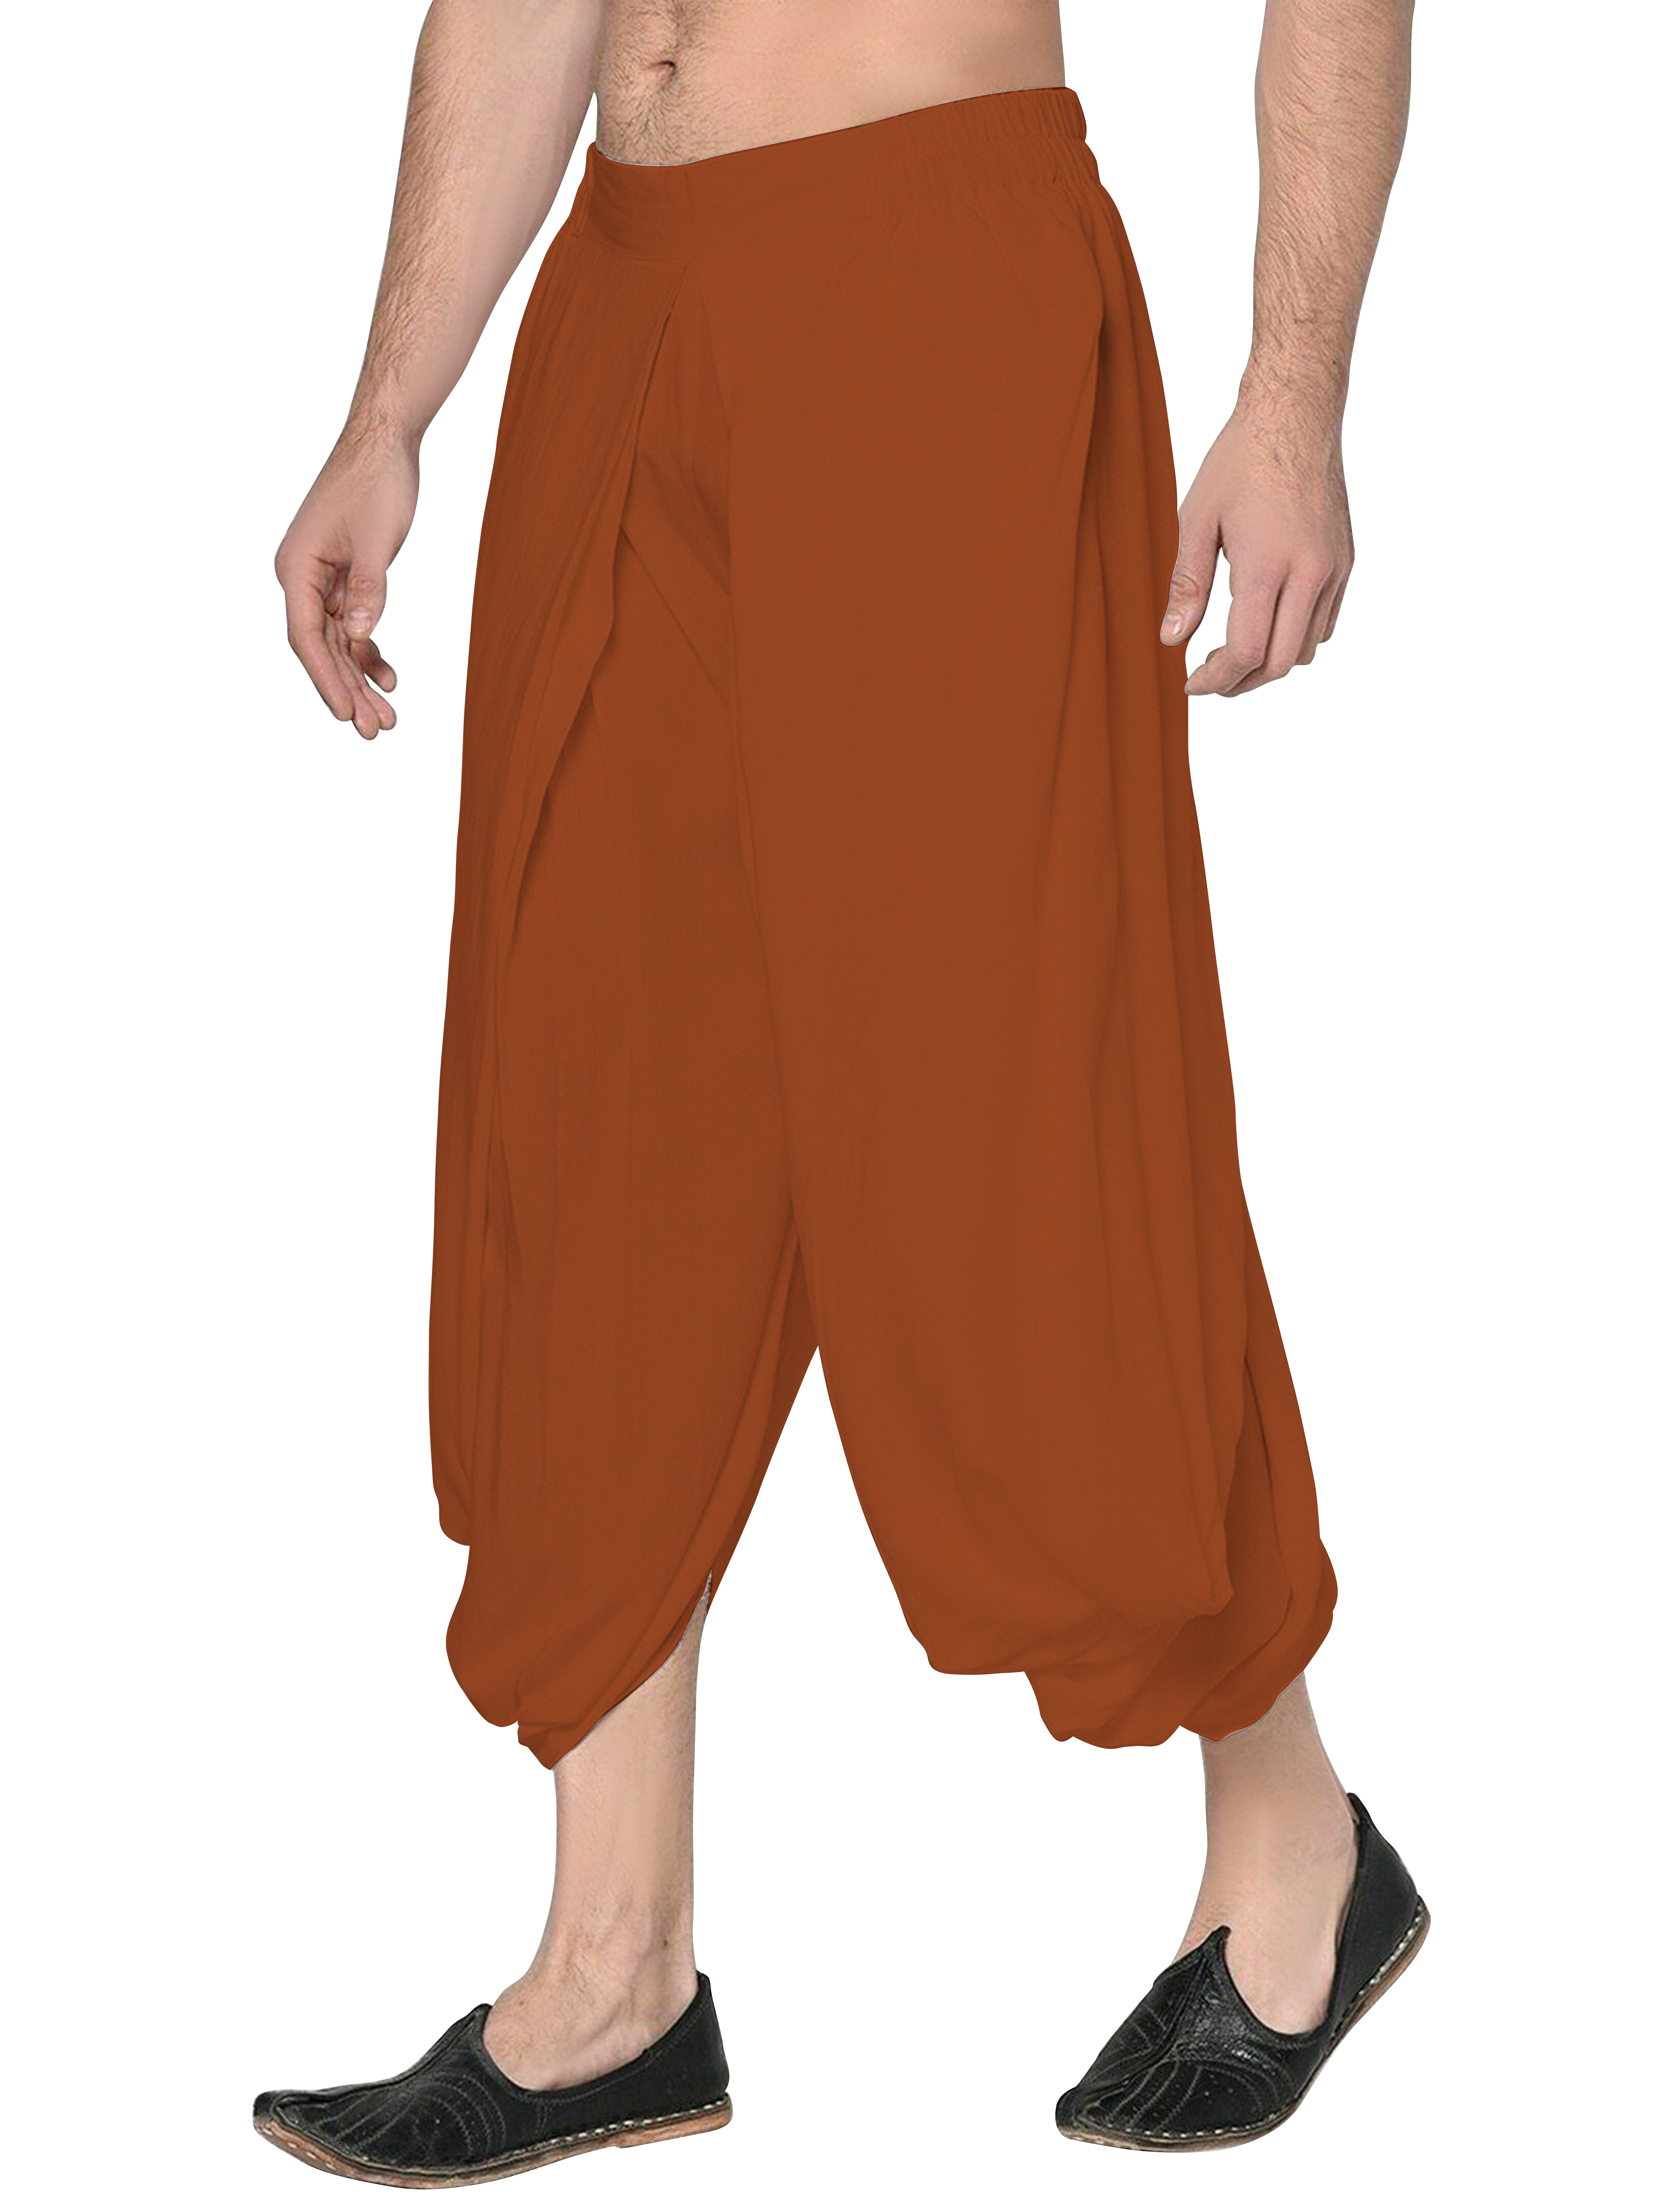 How To Rock The Dhoti Pant | The Luxe Report